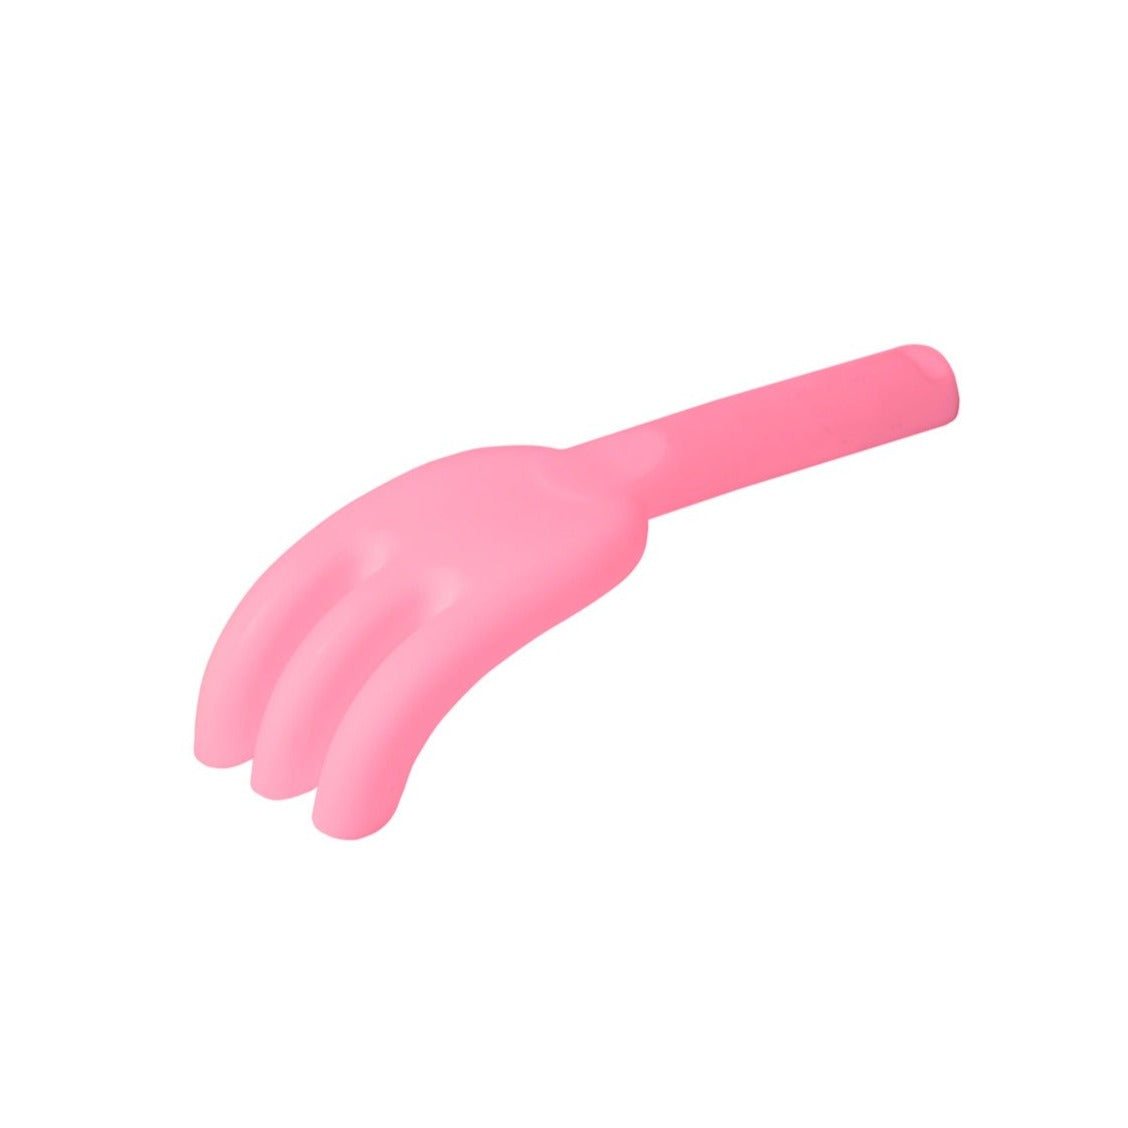 Scrunch Rake in Flamingo Pink | Scrunch Beach Toys available at Bear & Moo